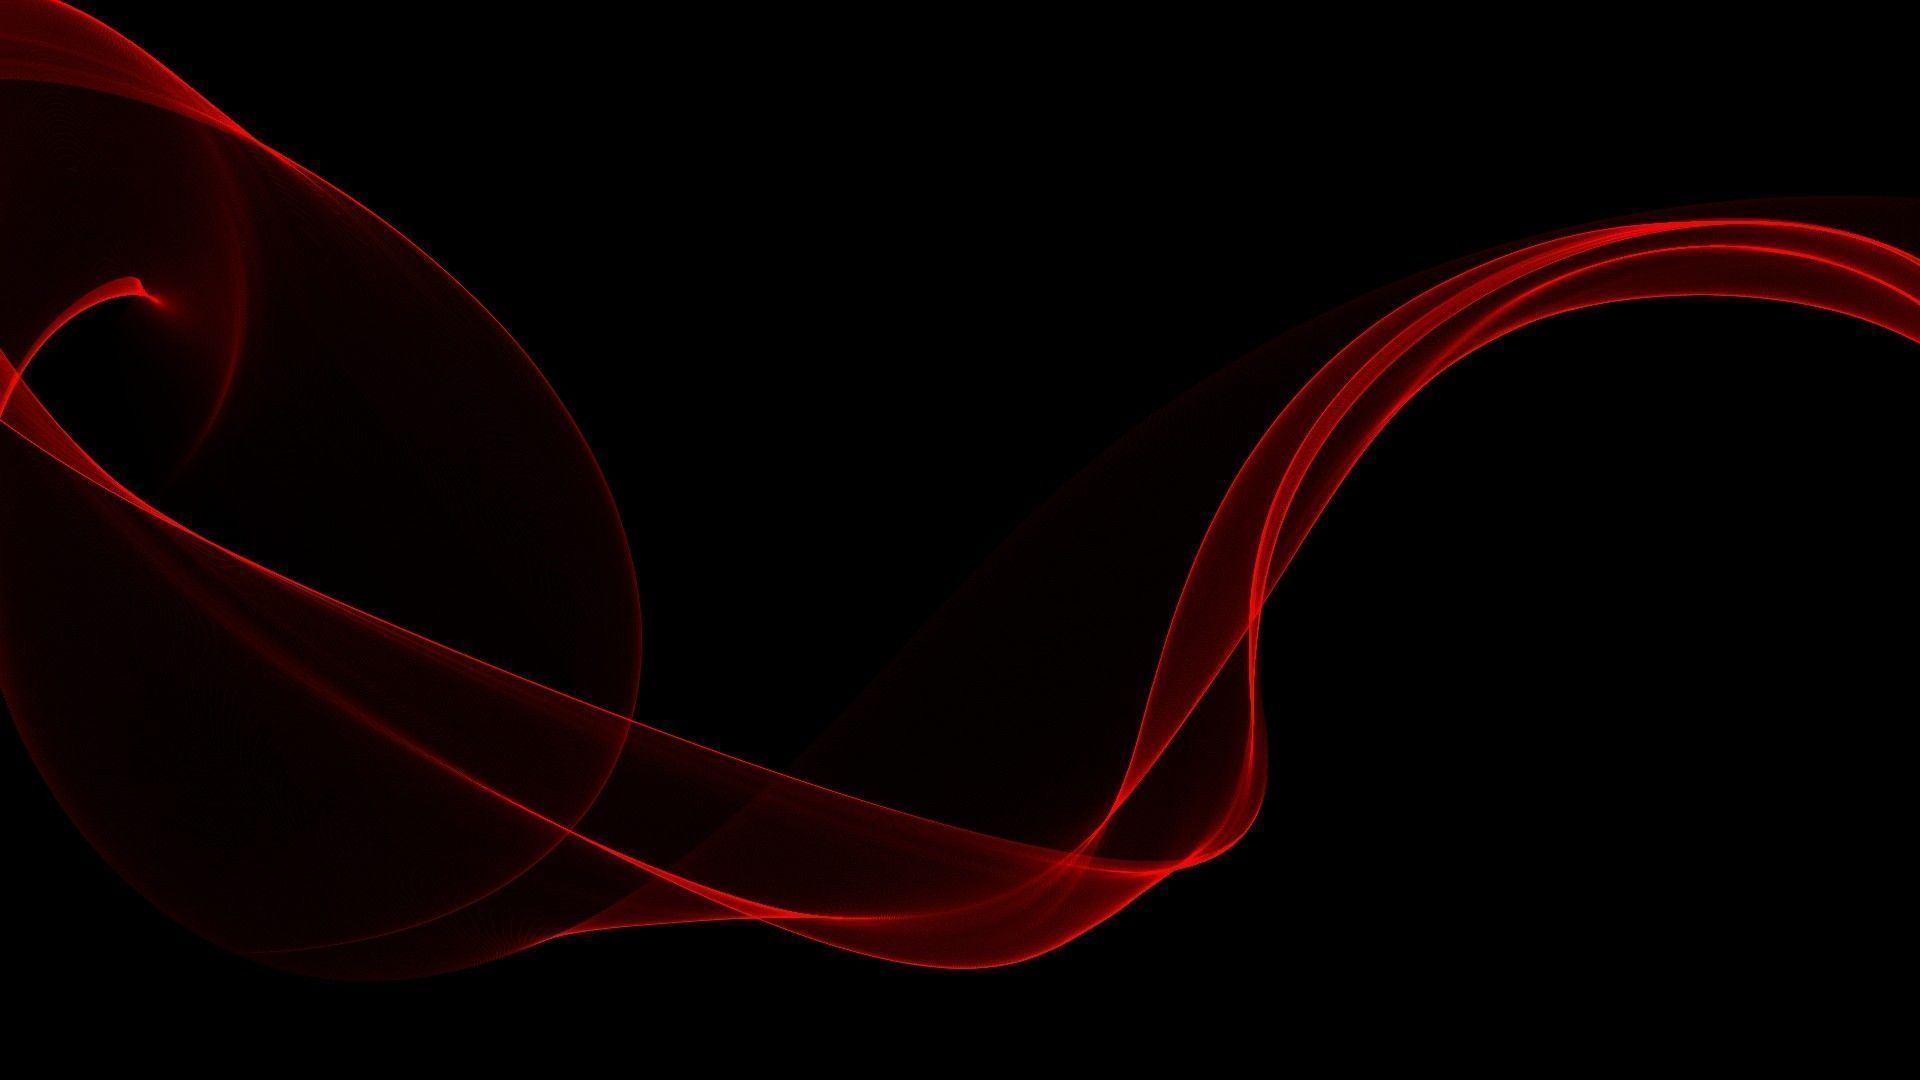 Black And Red Abstract Wallpaper 19